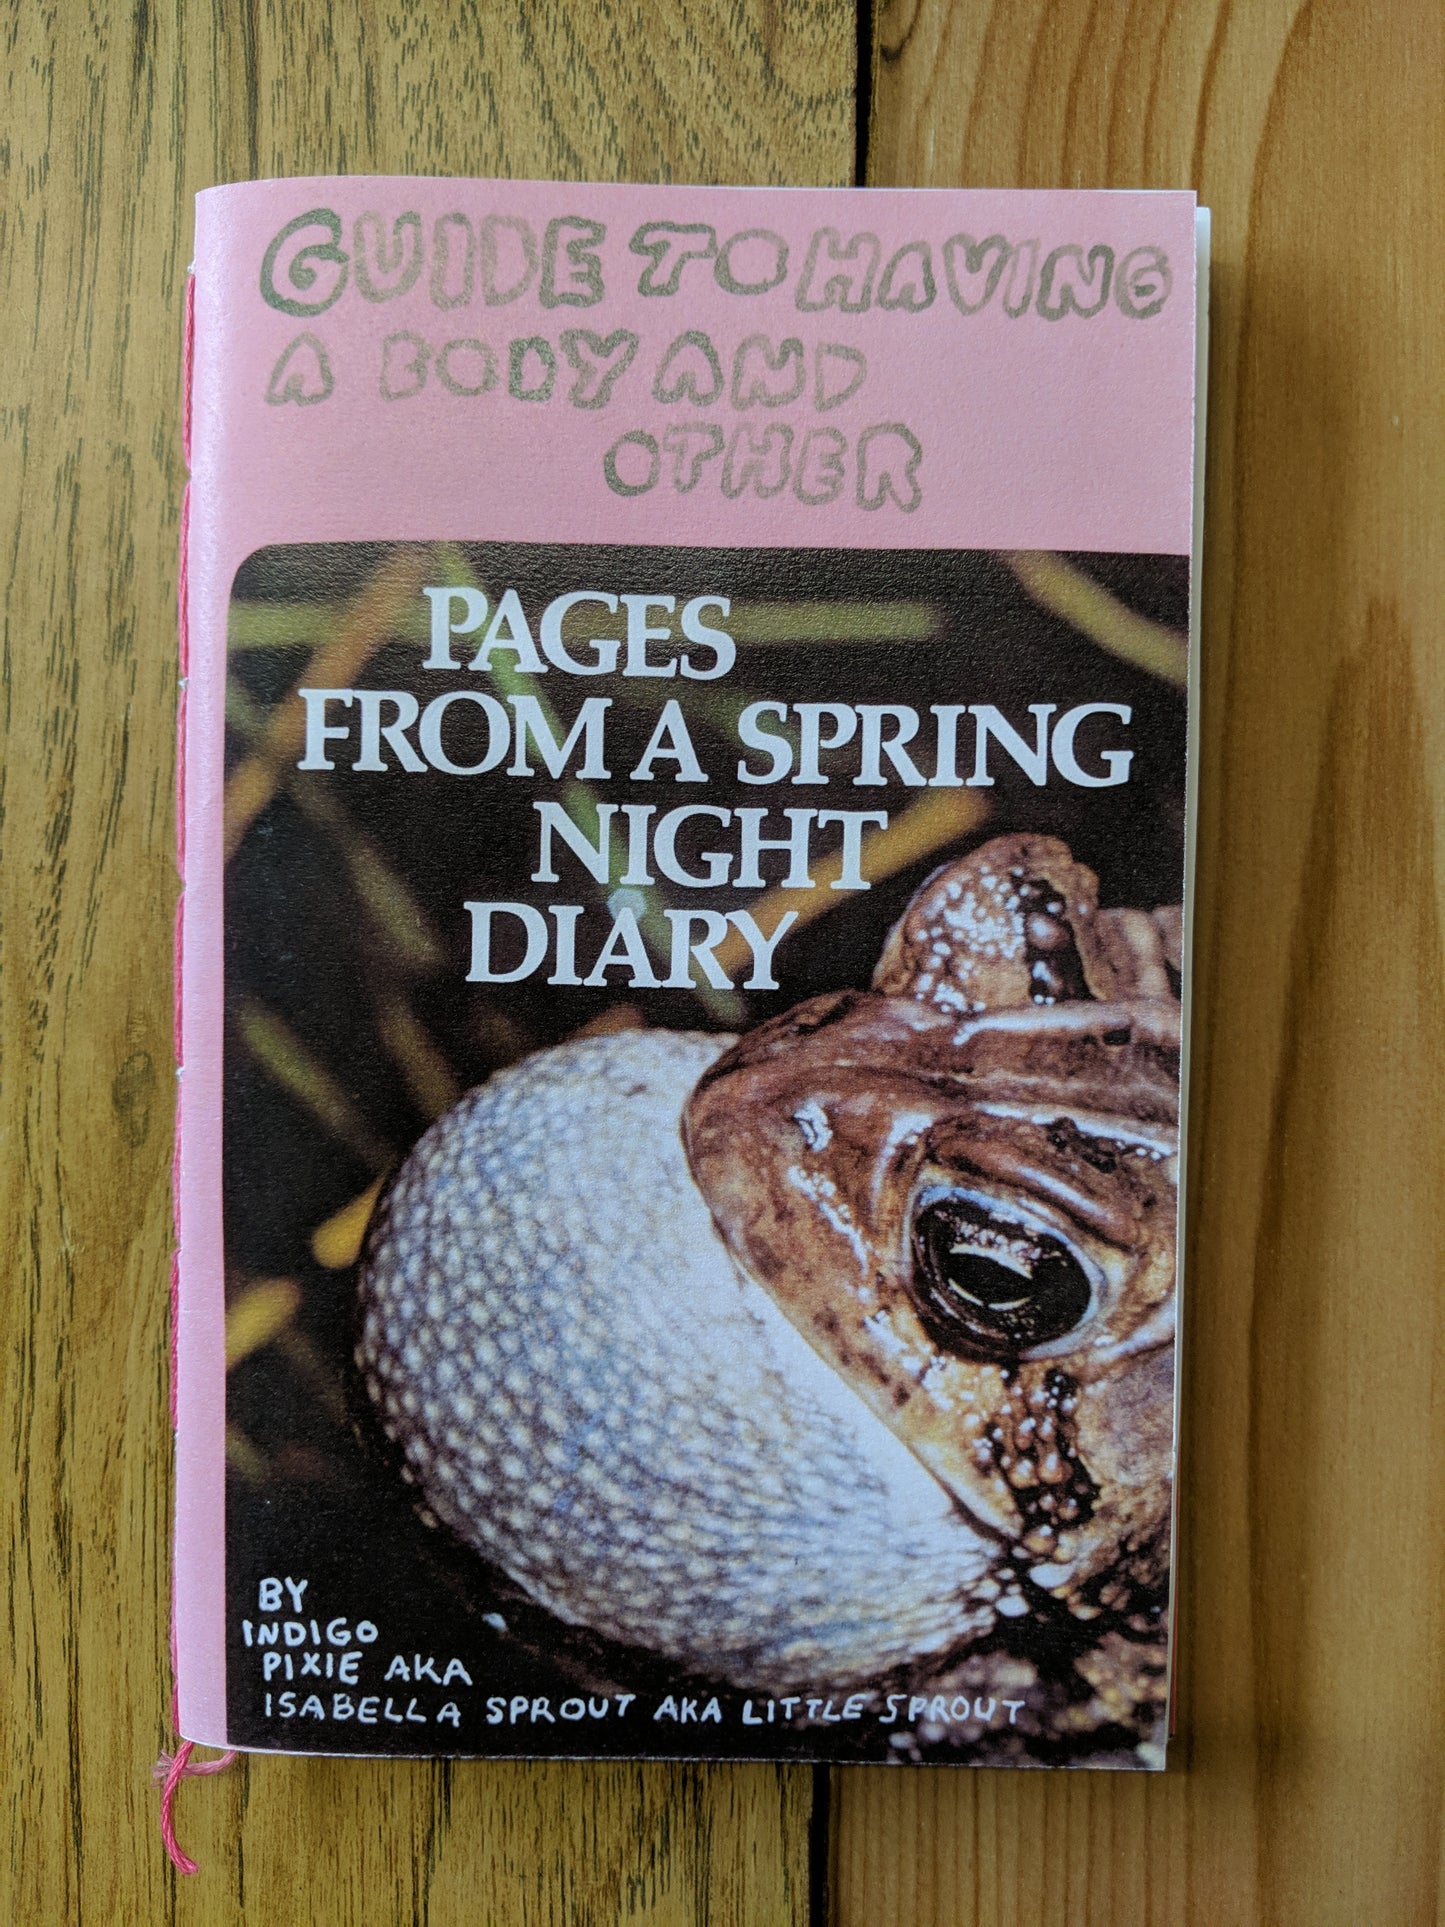 Guide to Having a Body and Other Pages From a Spring Night Diary